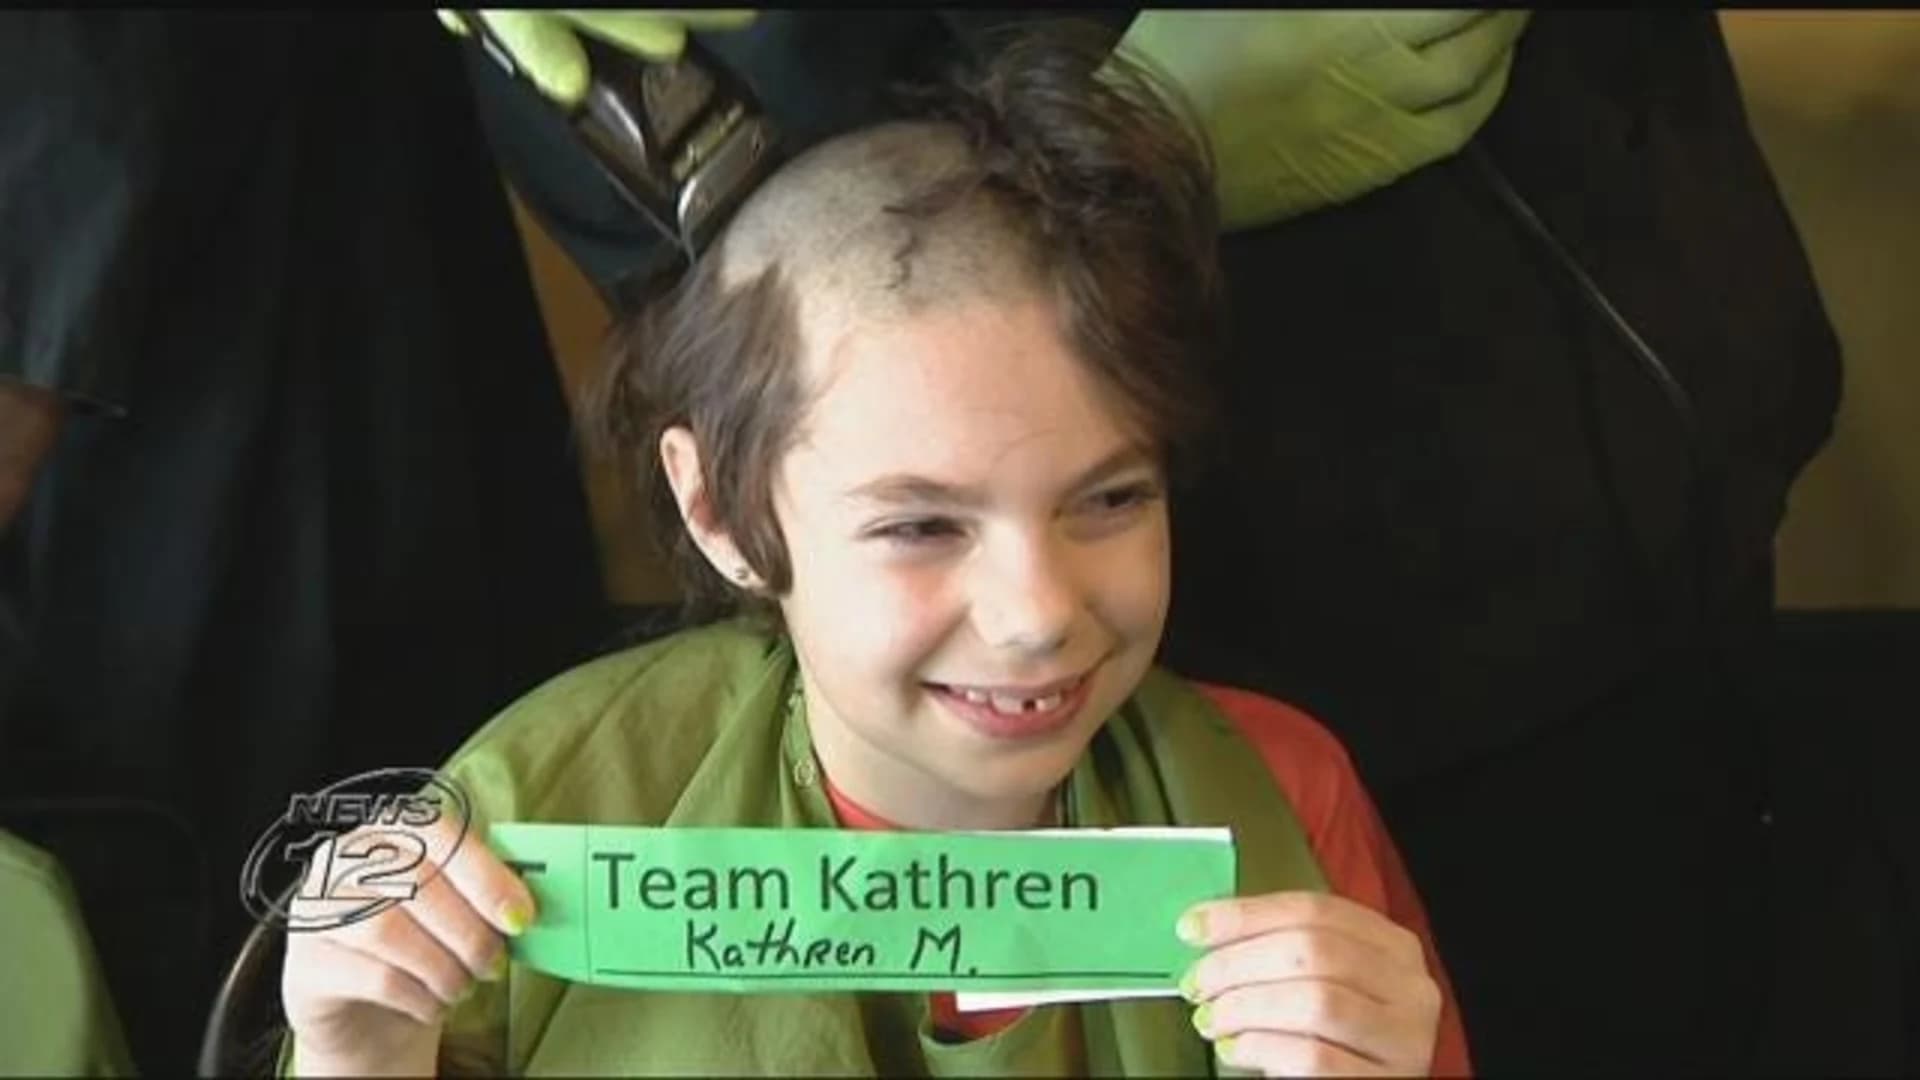 Fighting cancer 1 snip at a time: St. Baldrick’s returns to Northport